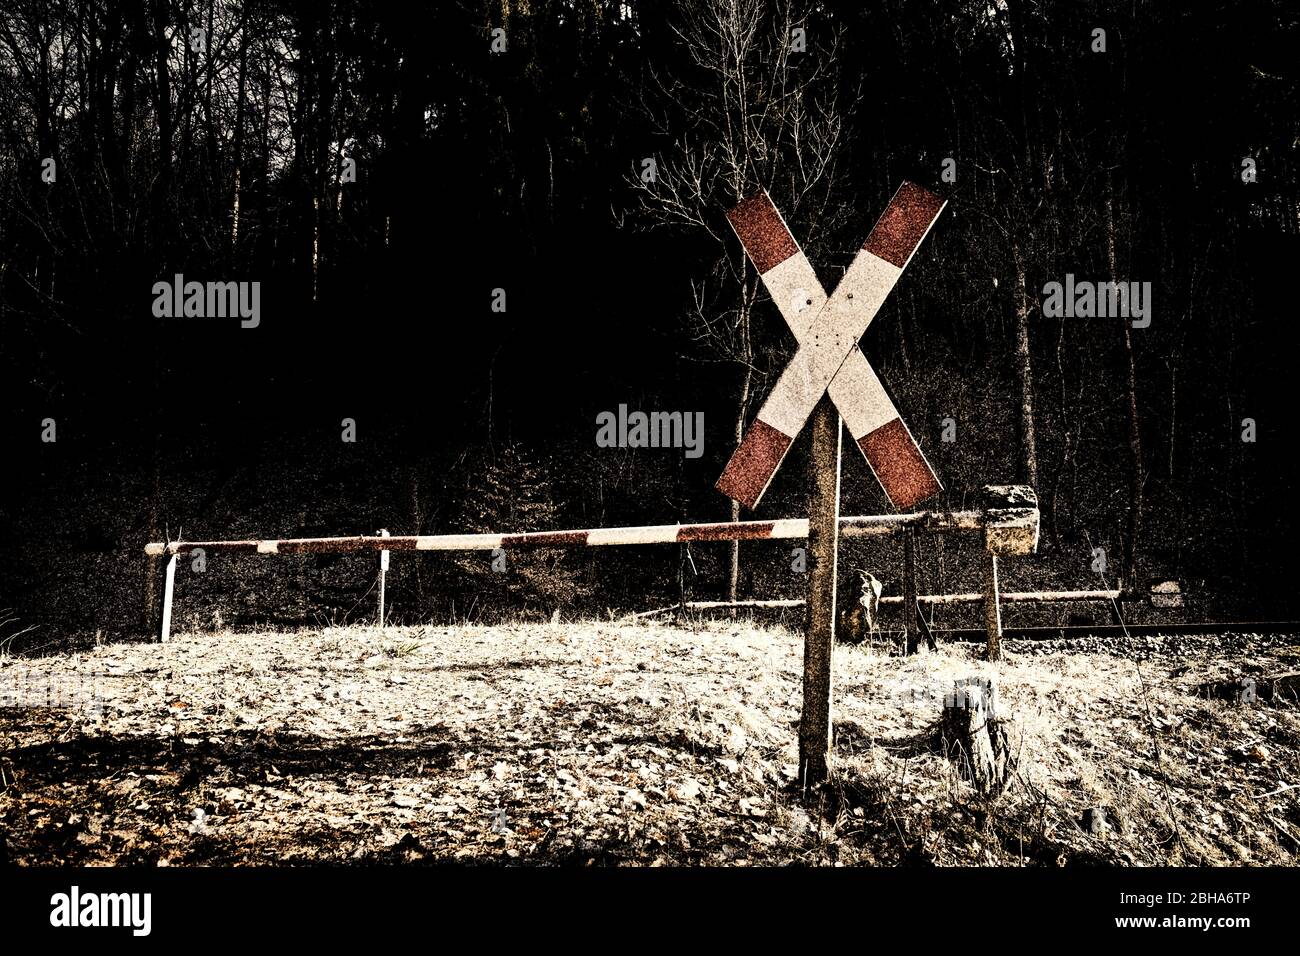 Railroad crossing, barrier out of service, desolate, St. Andrew's Cross, digitally processed, RailArt Stock Photo